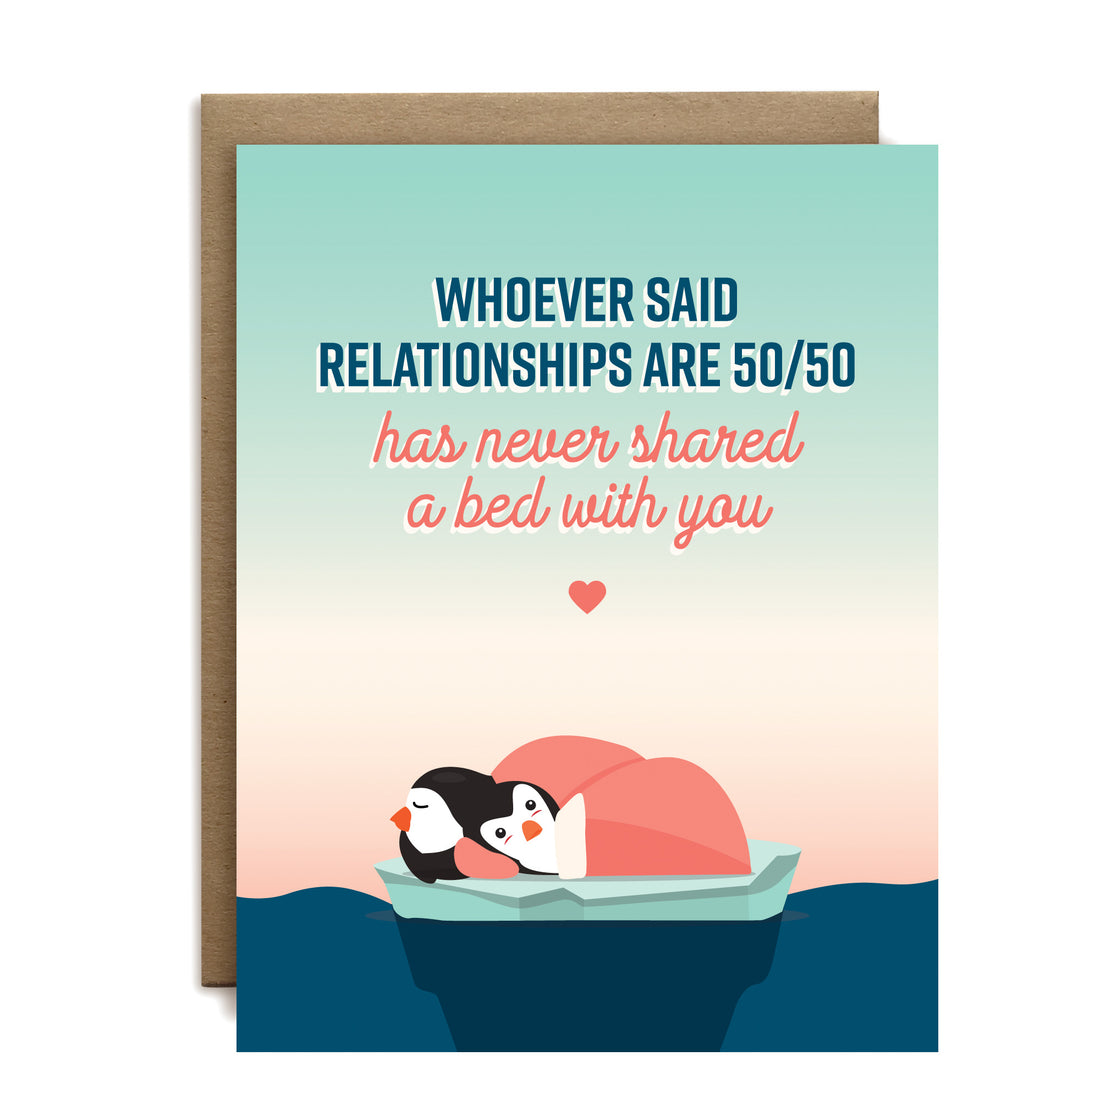 Whoever said relationships are 50/50 have never shared a bed with you love greeting card by I&